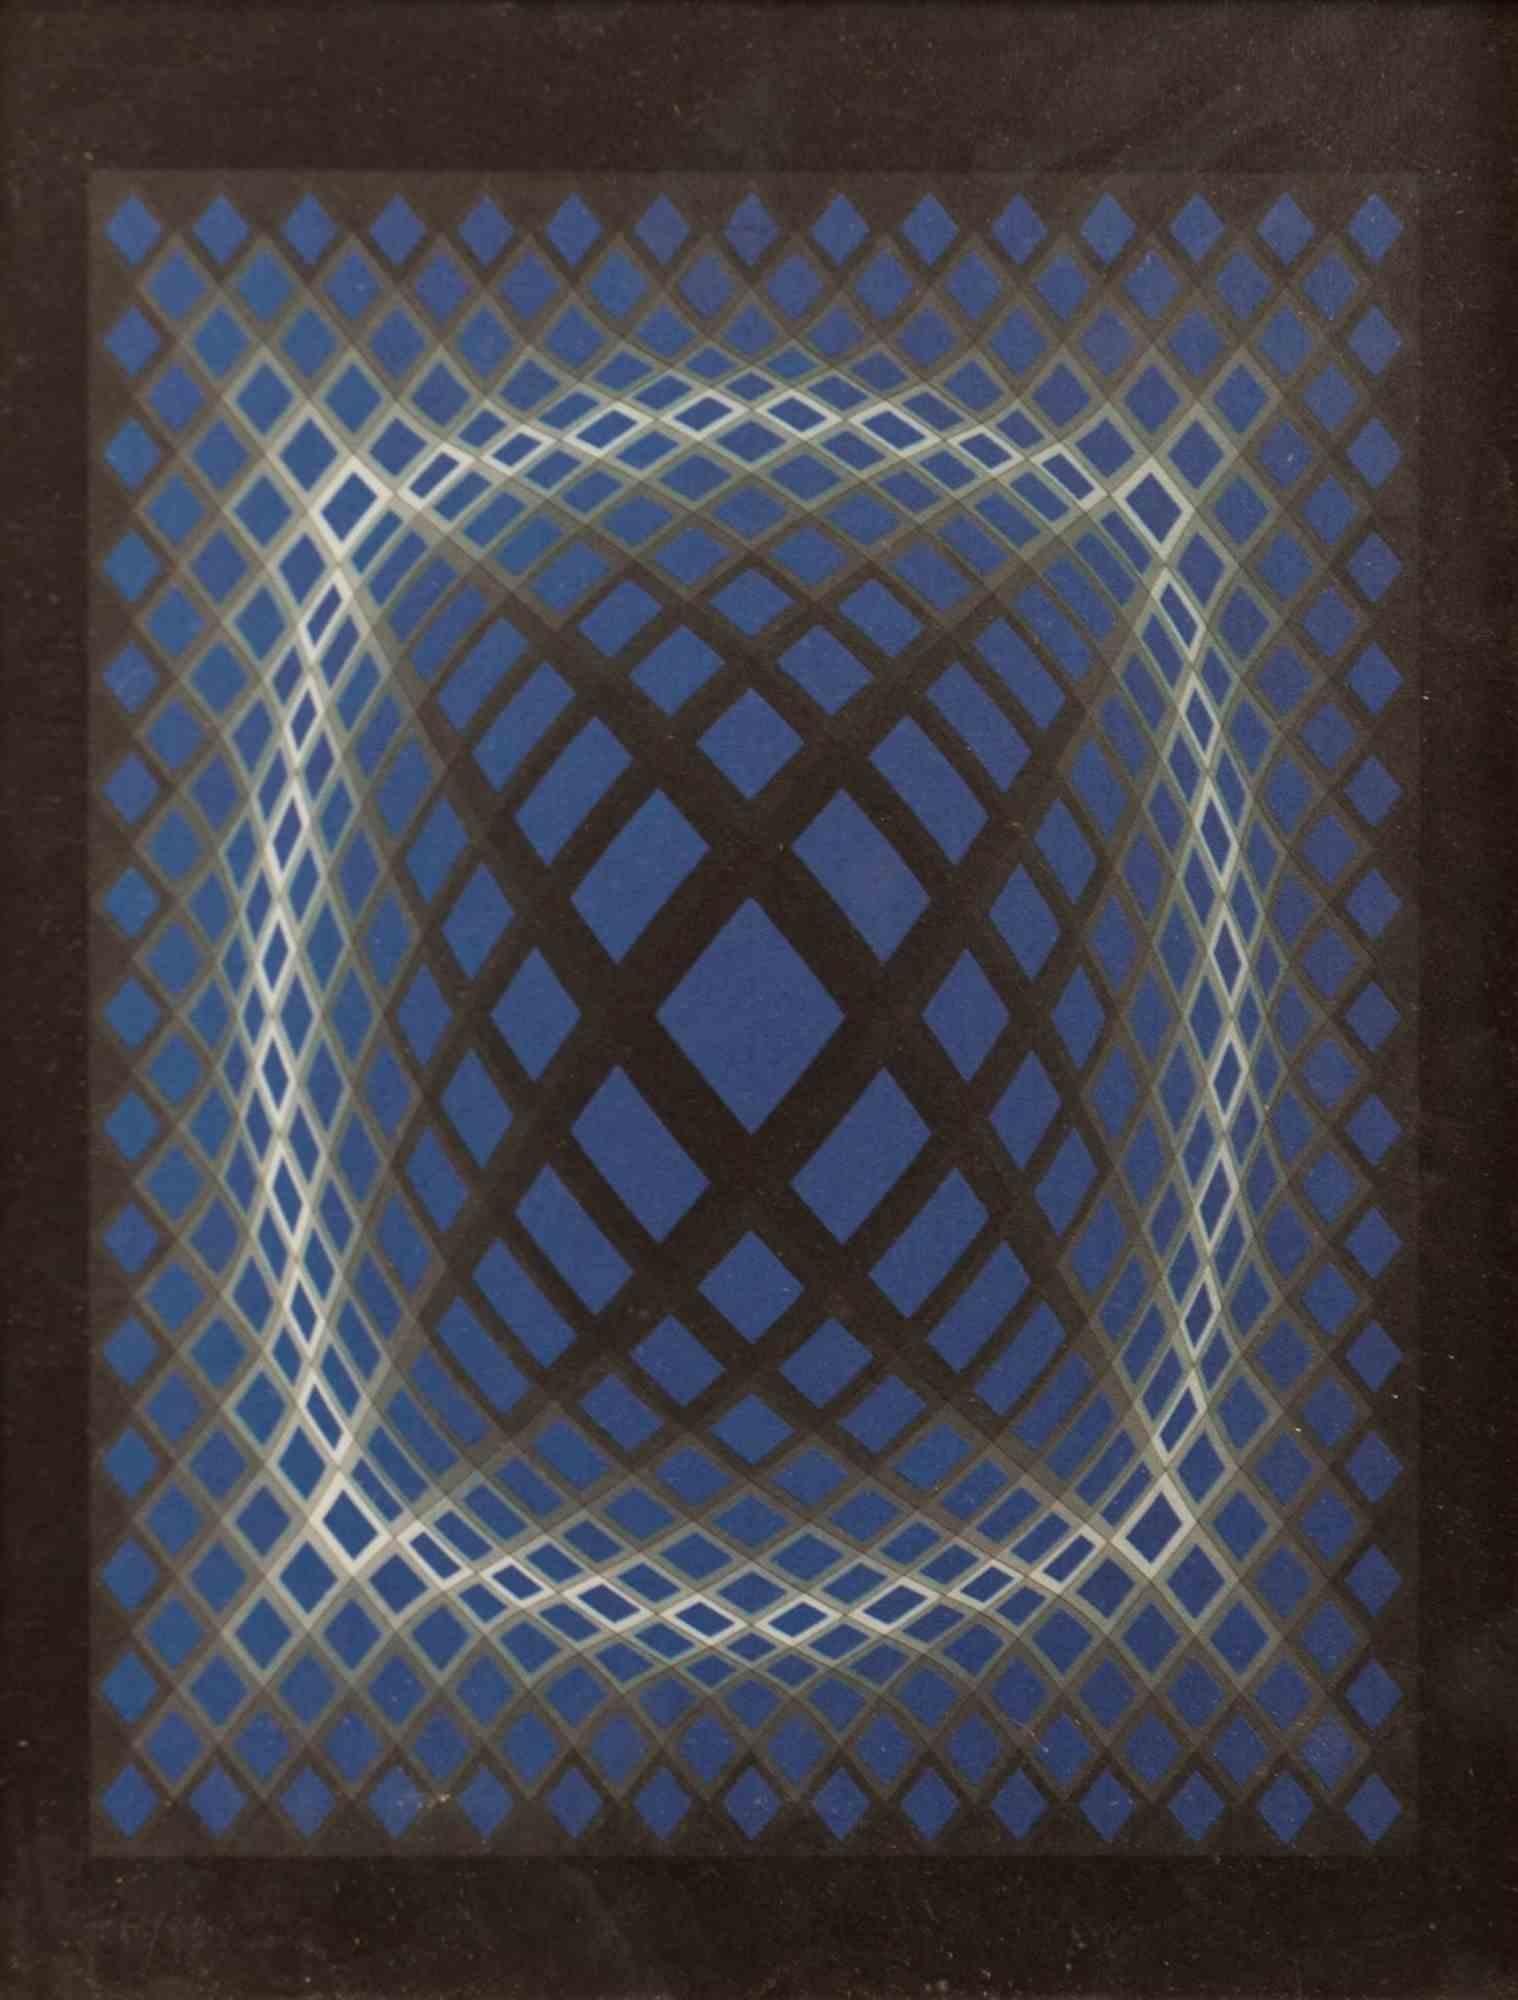 Abstract Print Victor Vasarely - Lattice - Srigraphie de V. Vasarely - annes 1980